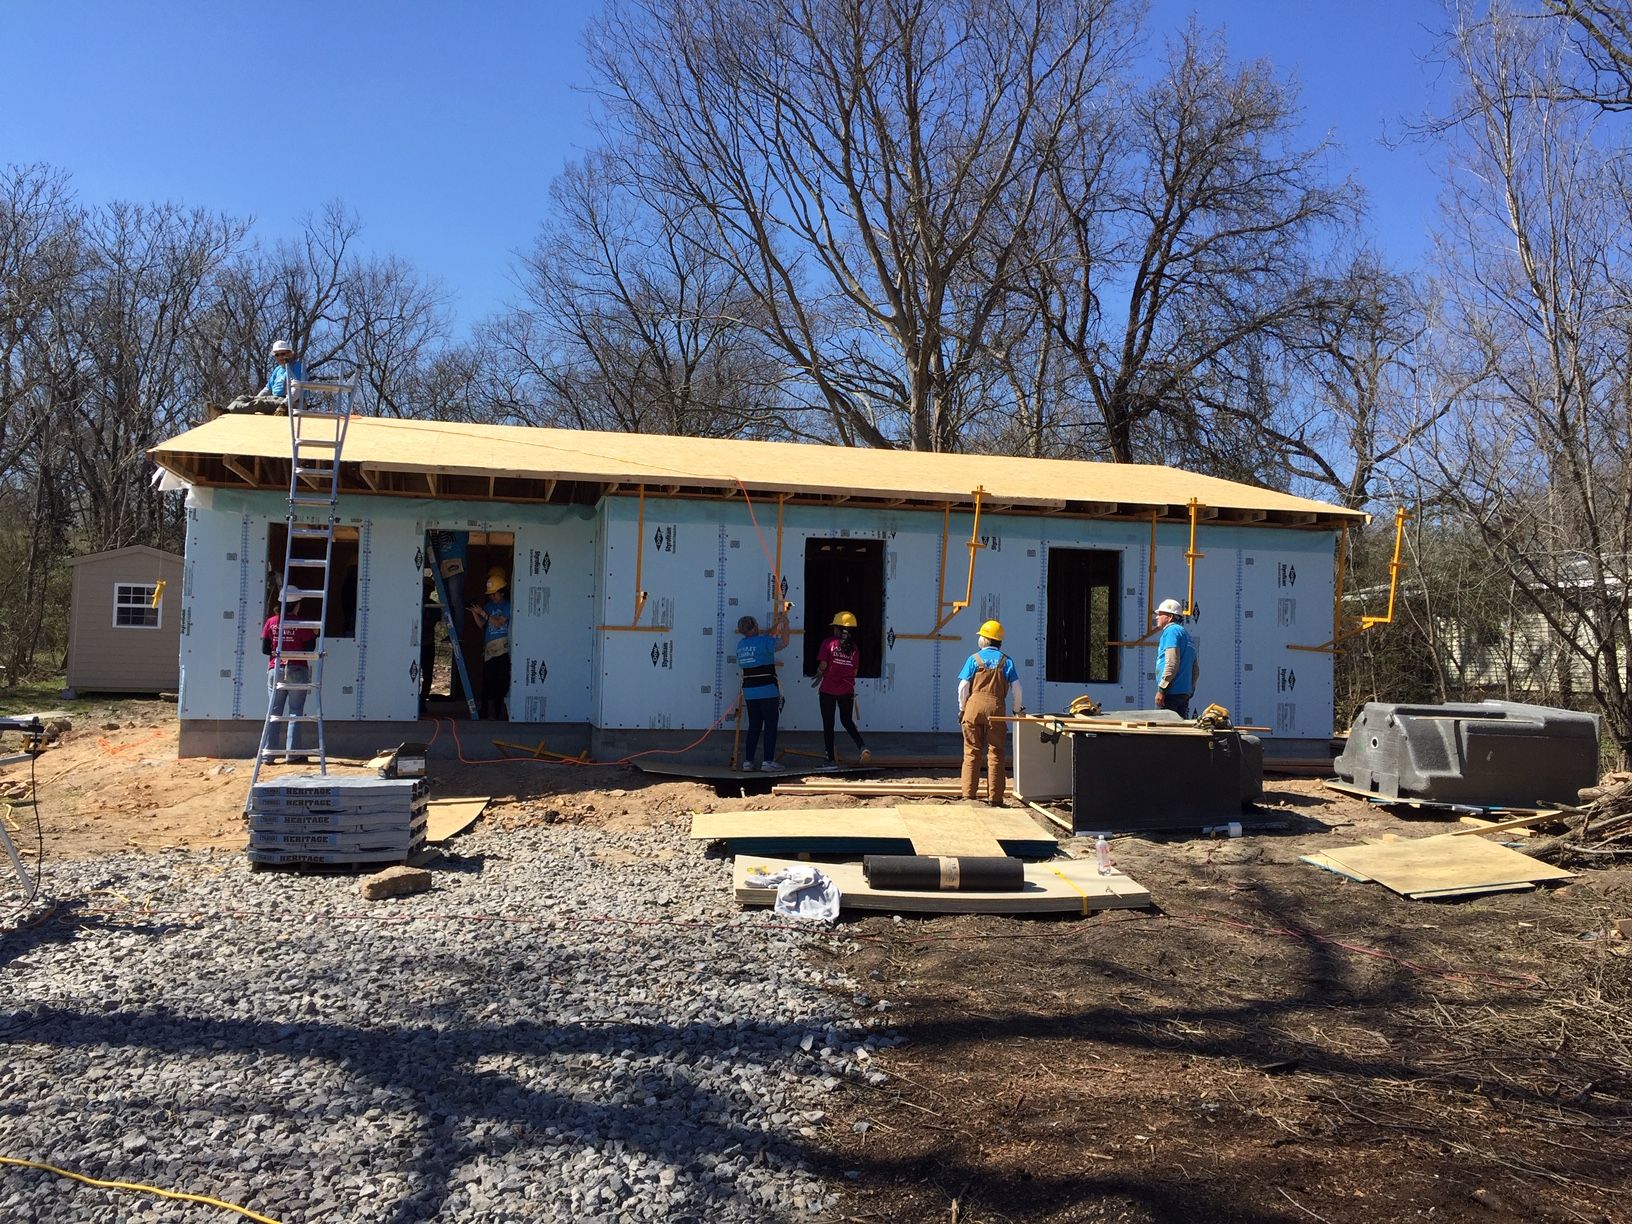 House #26 Under Construction, March 2019